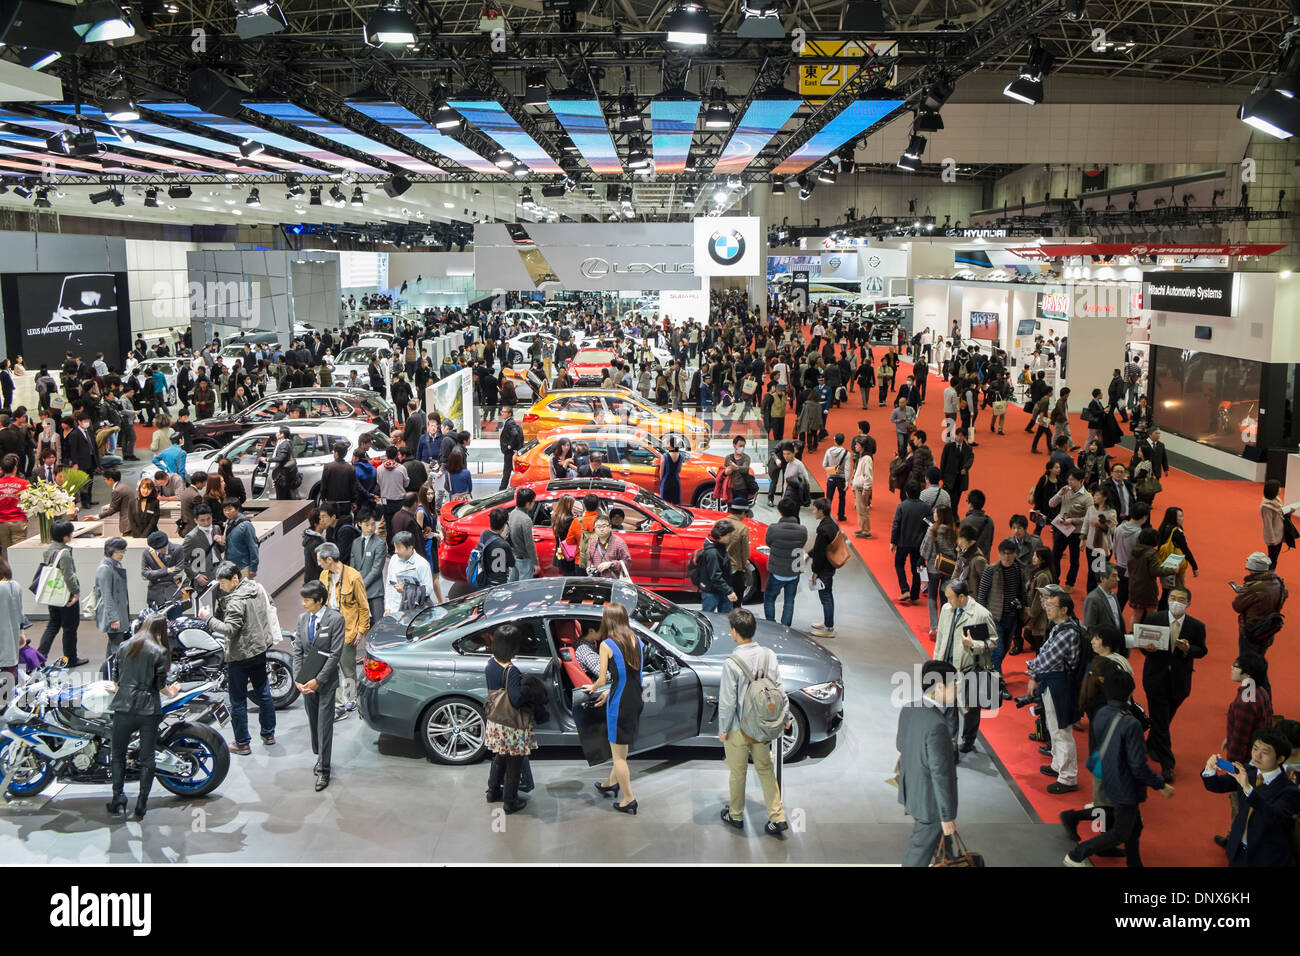 Interior view of exhibition hall at Tokyo Motor Show 2013 with large crowds of visitors Stock Photo